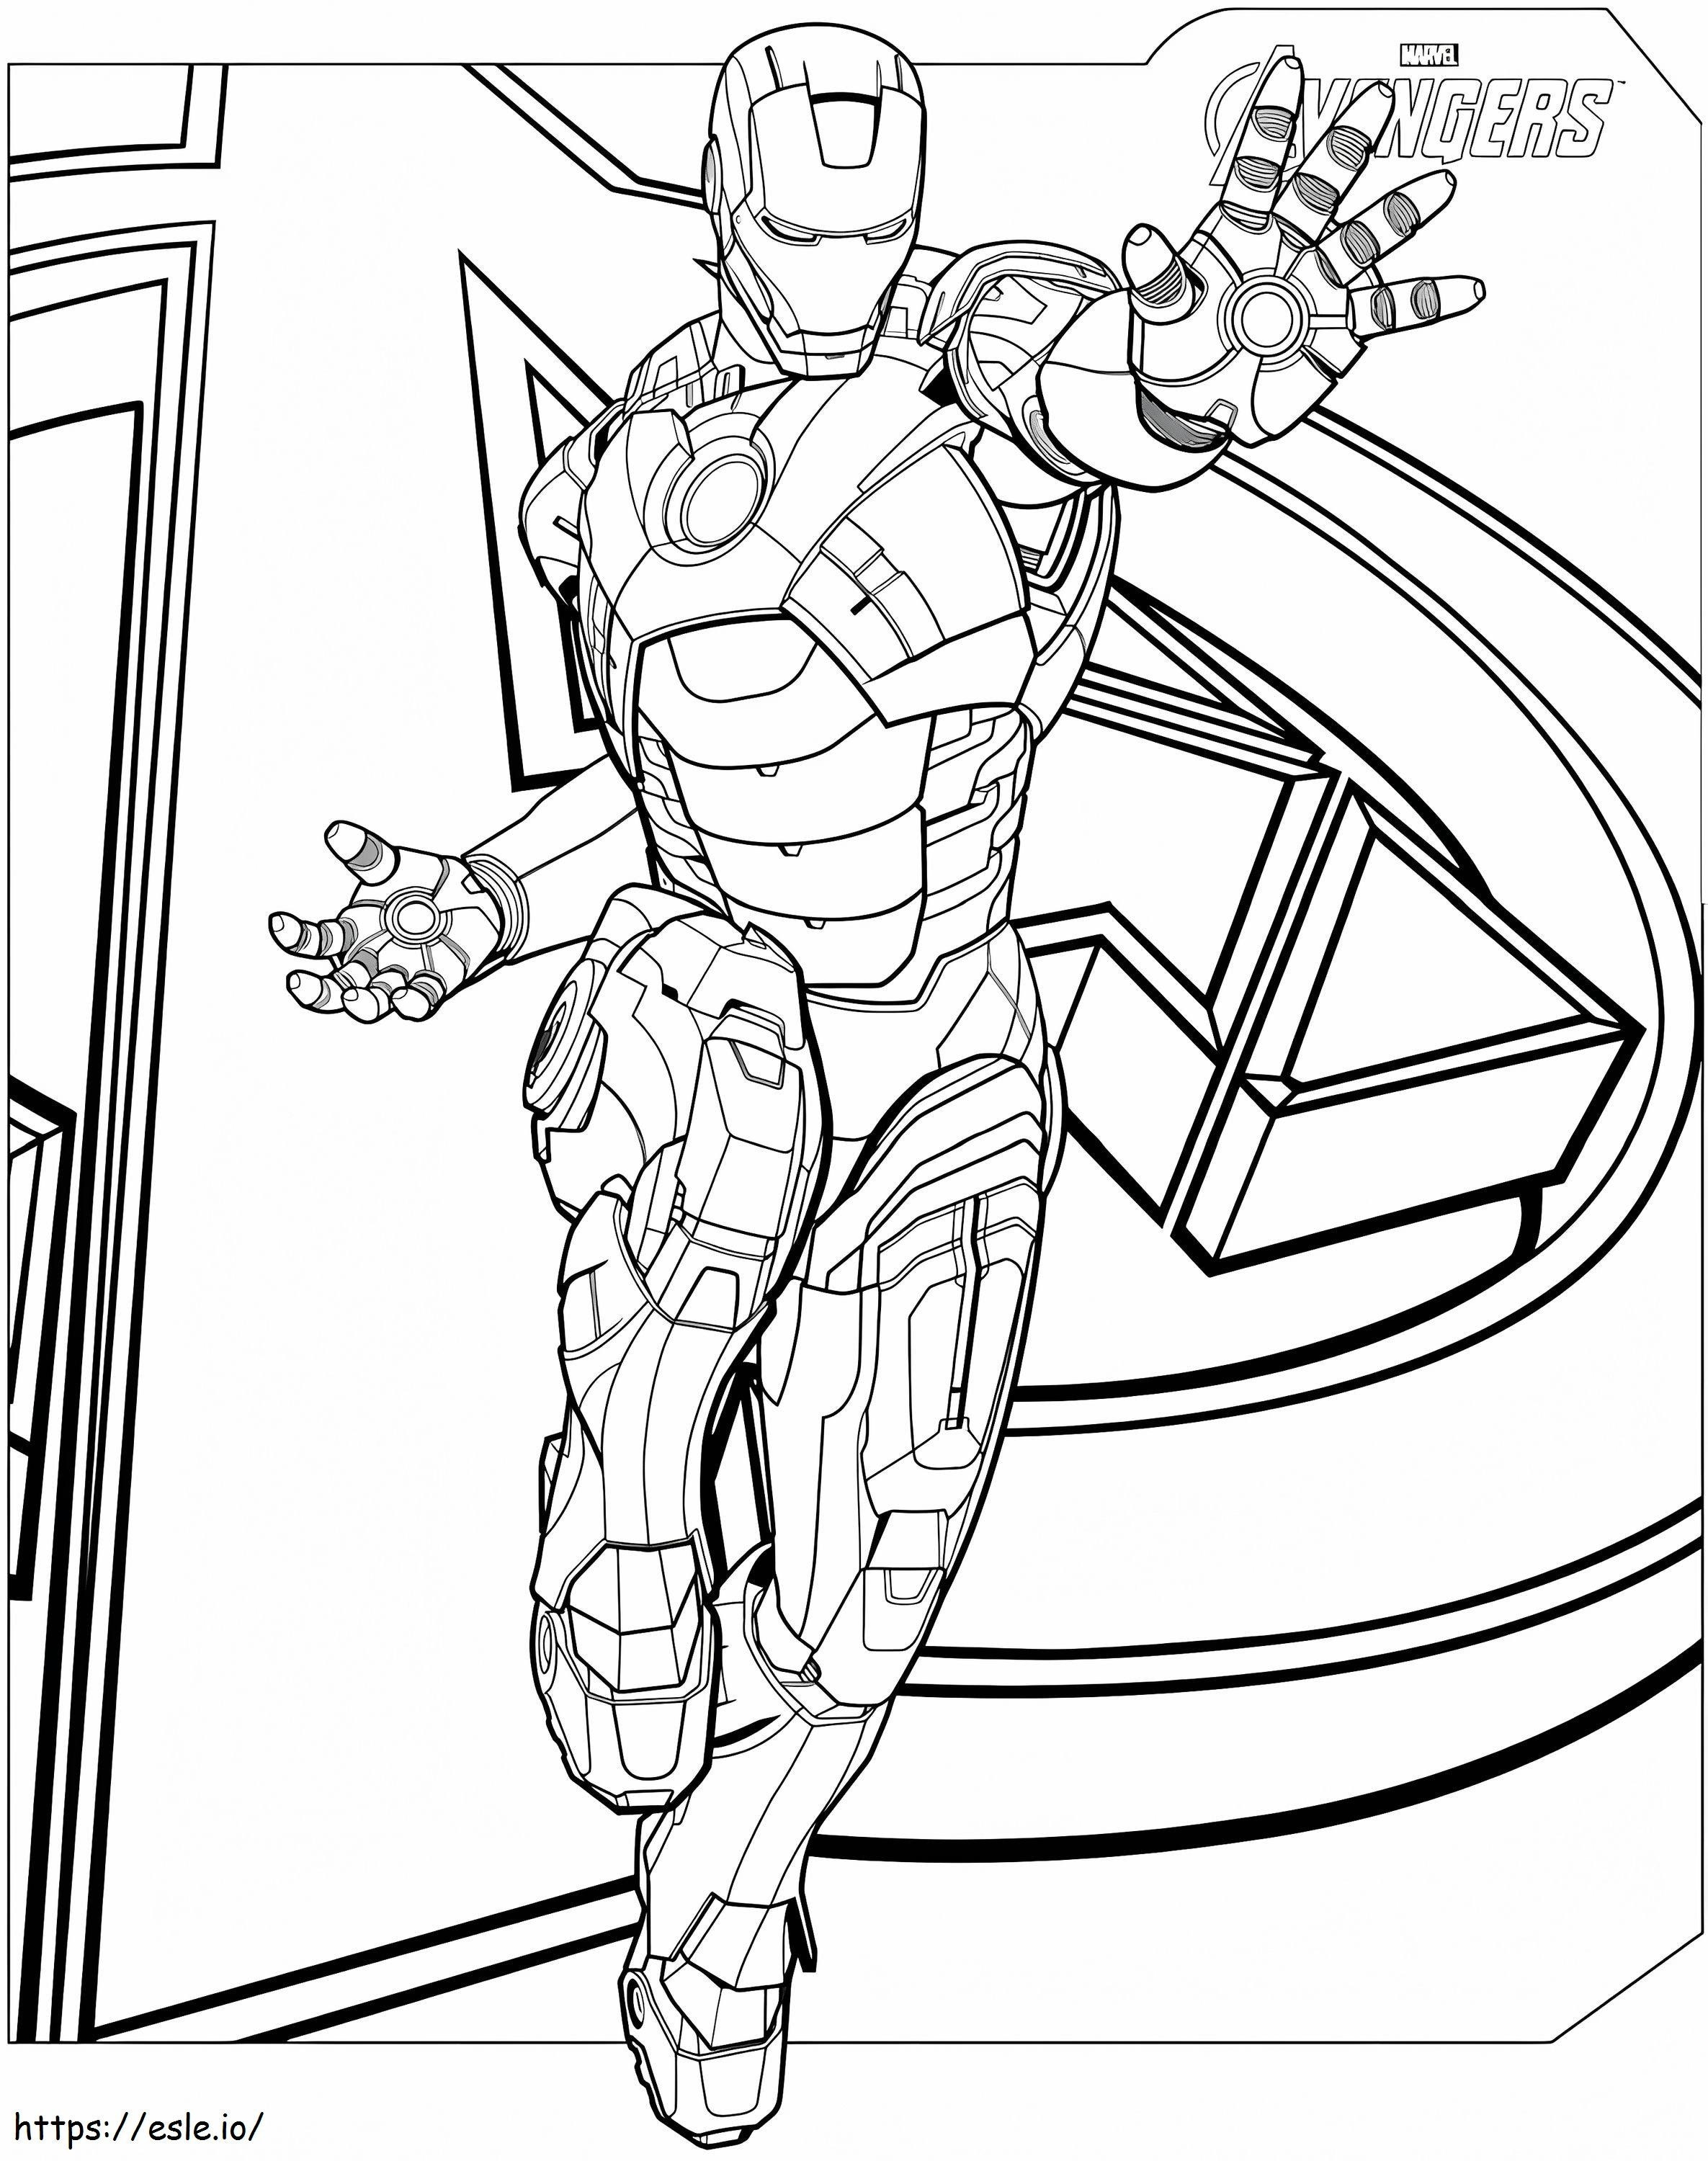 1560587052 Iron Man A4 coloring page